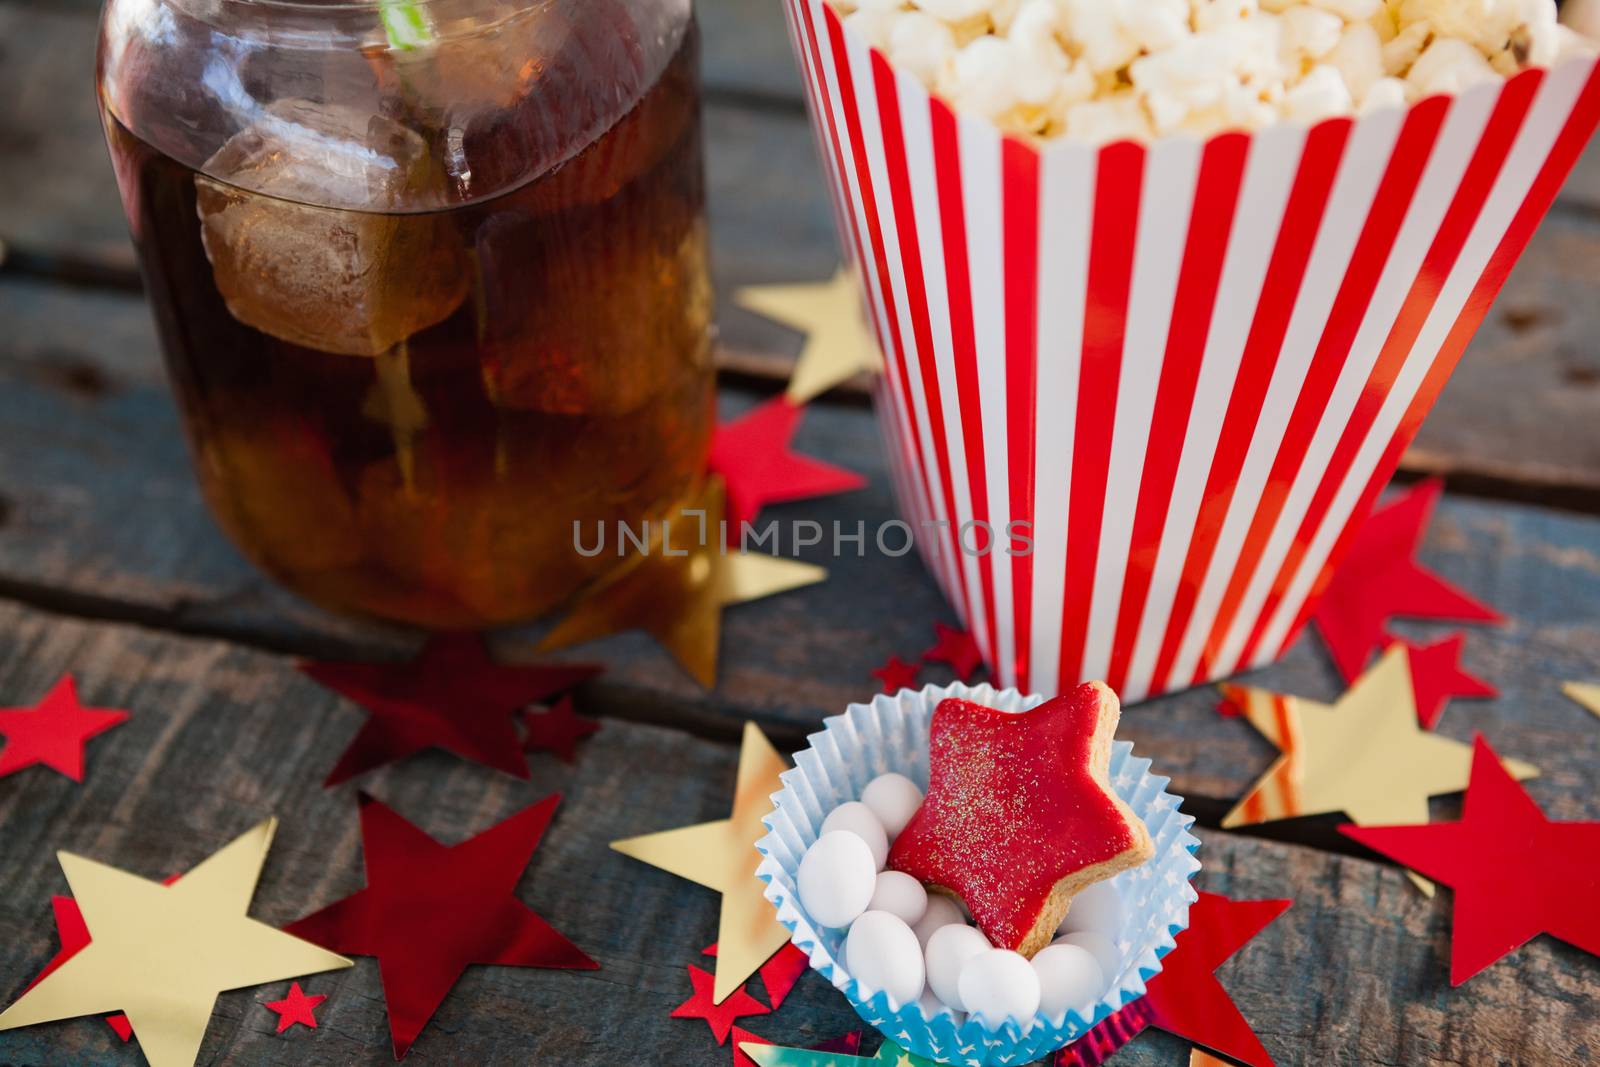 Popcorn, confectionery and drink with 4th july theme on wooden table